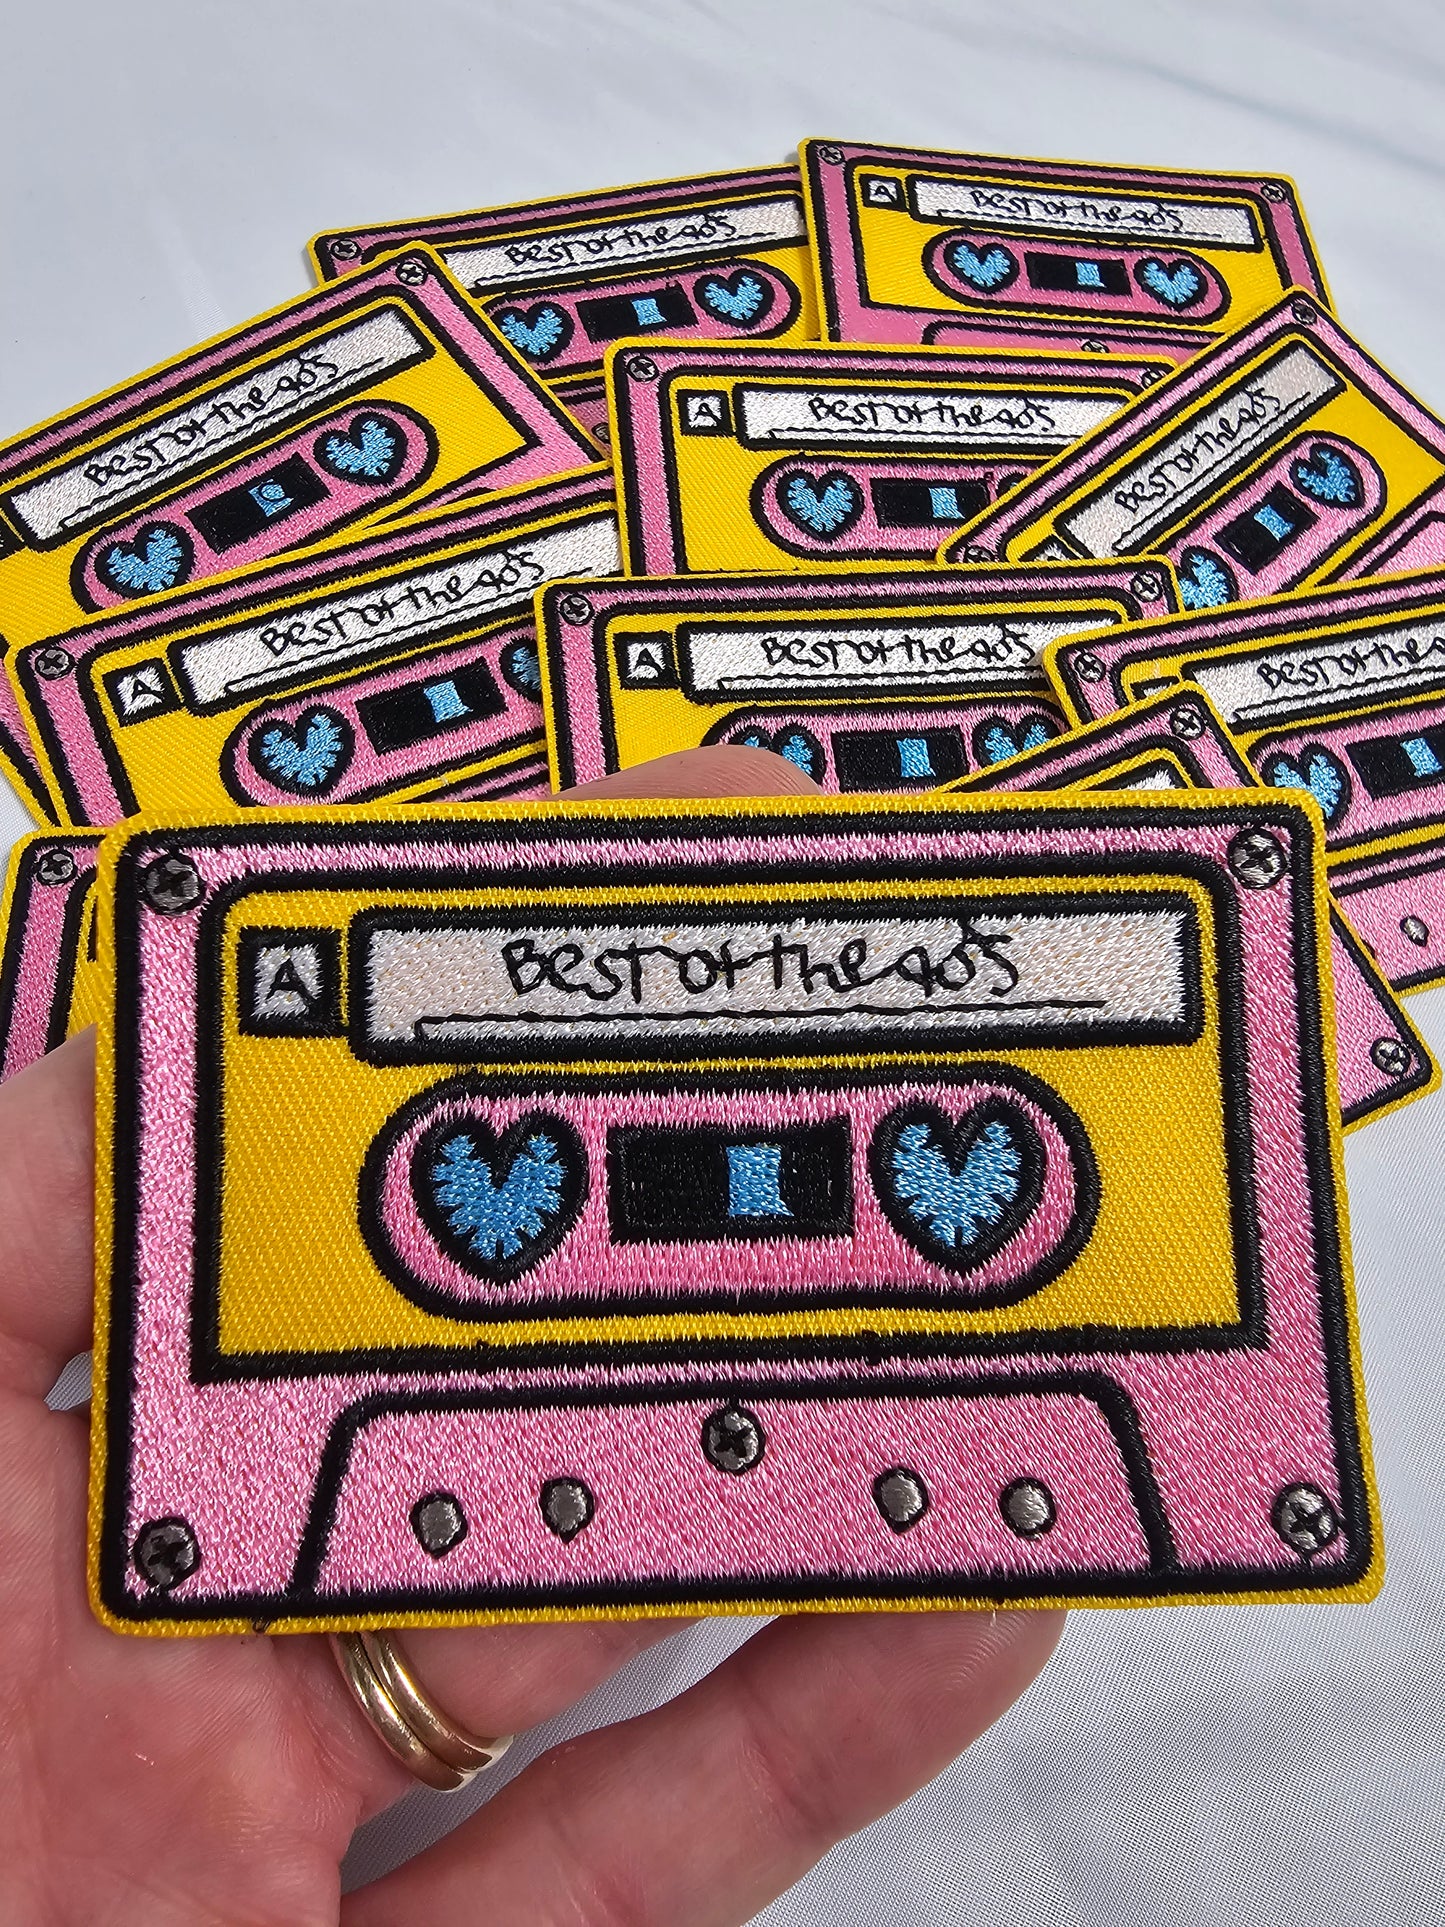 Best of the 90s Pink Cassette Tape Embroidery Iron On Patch